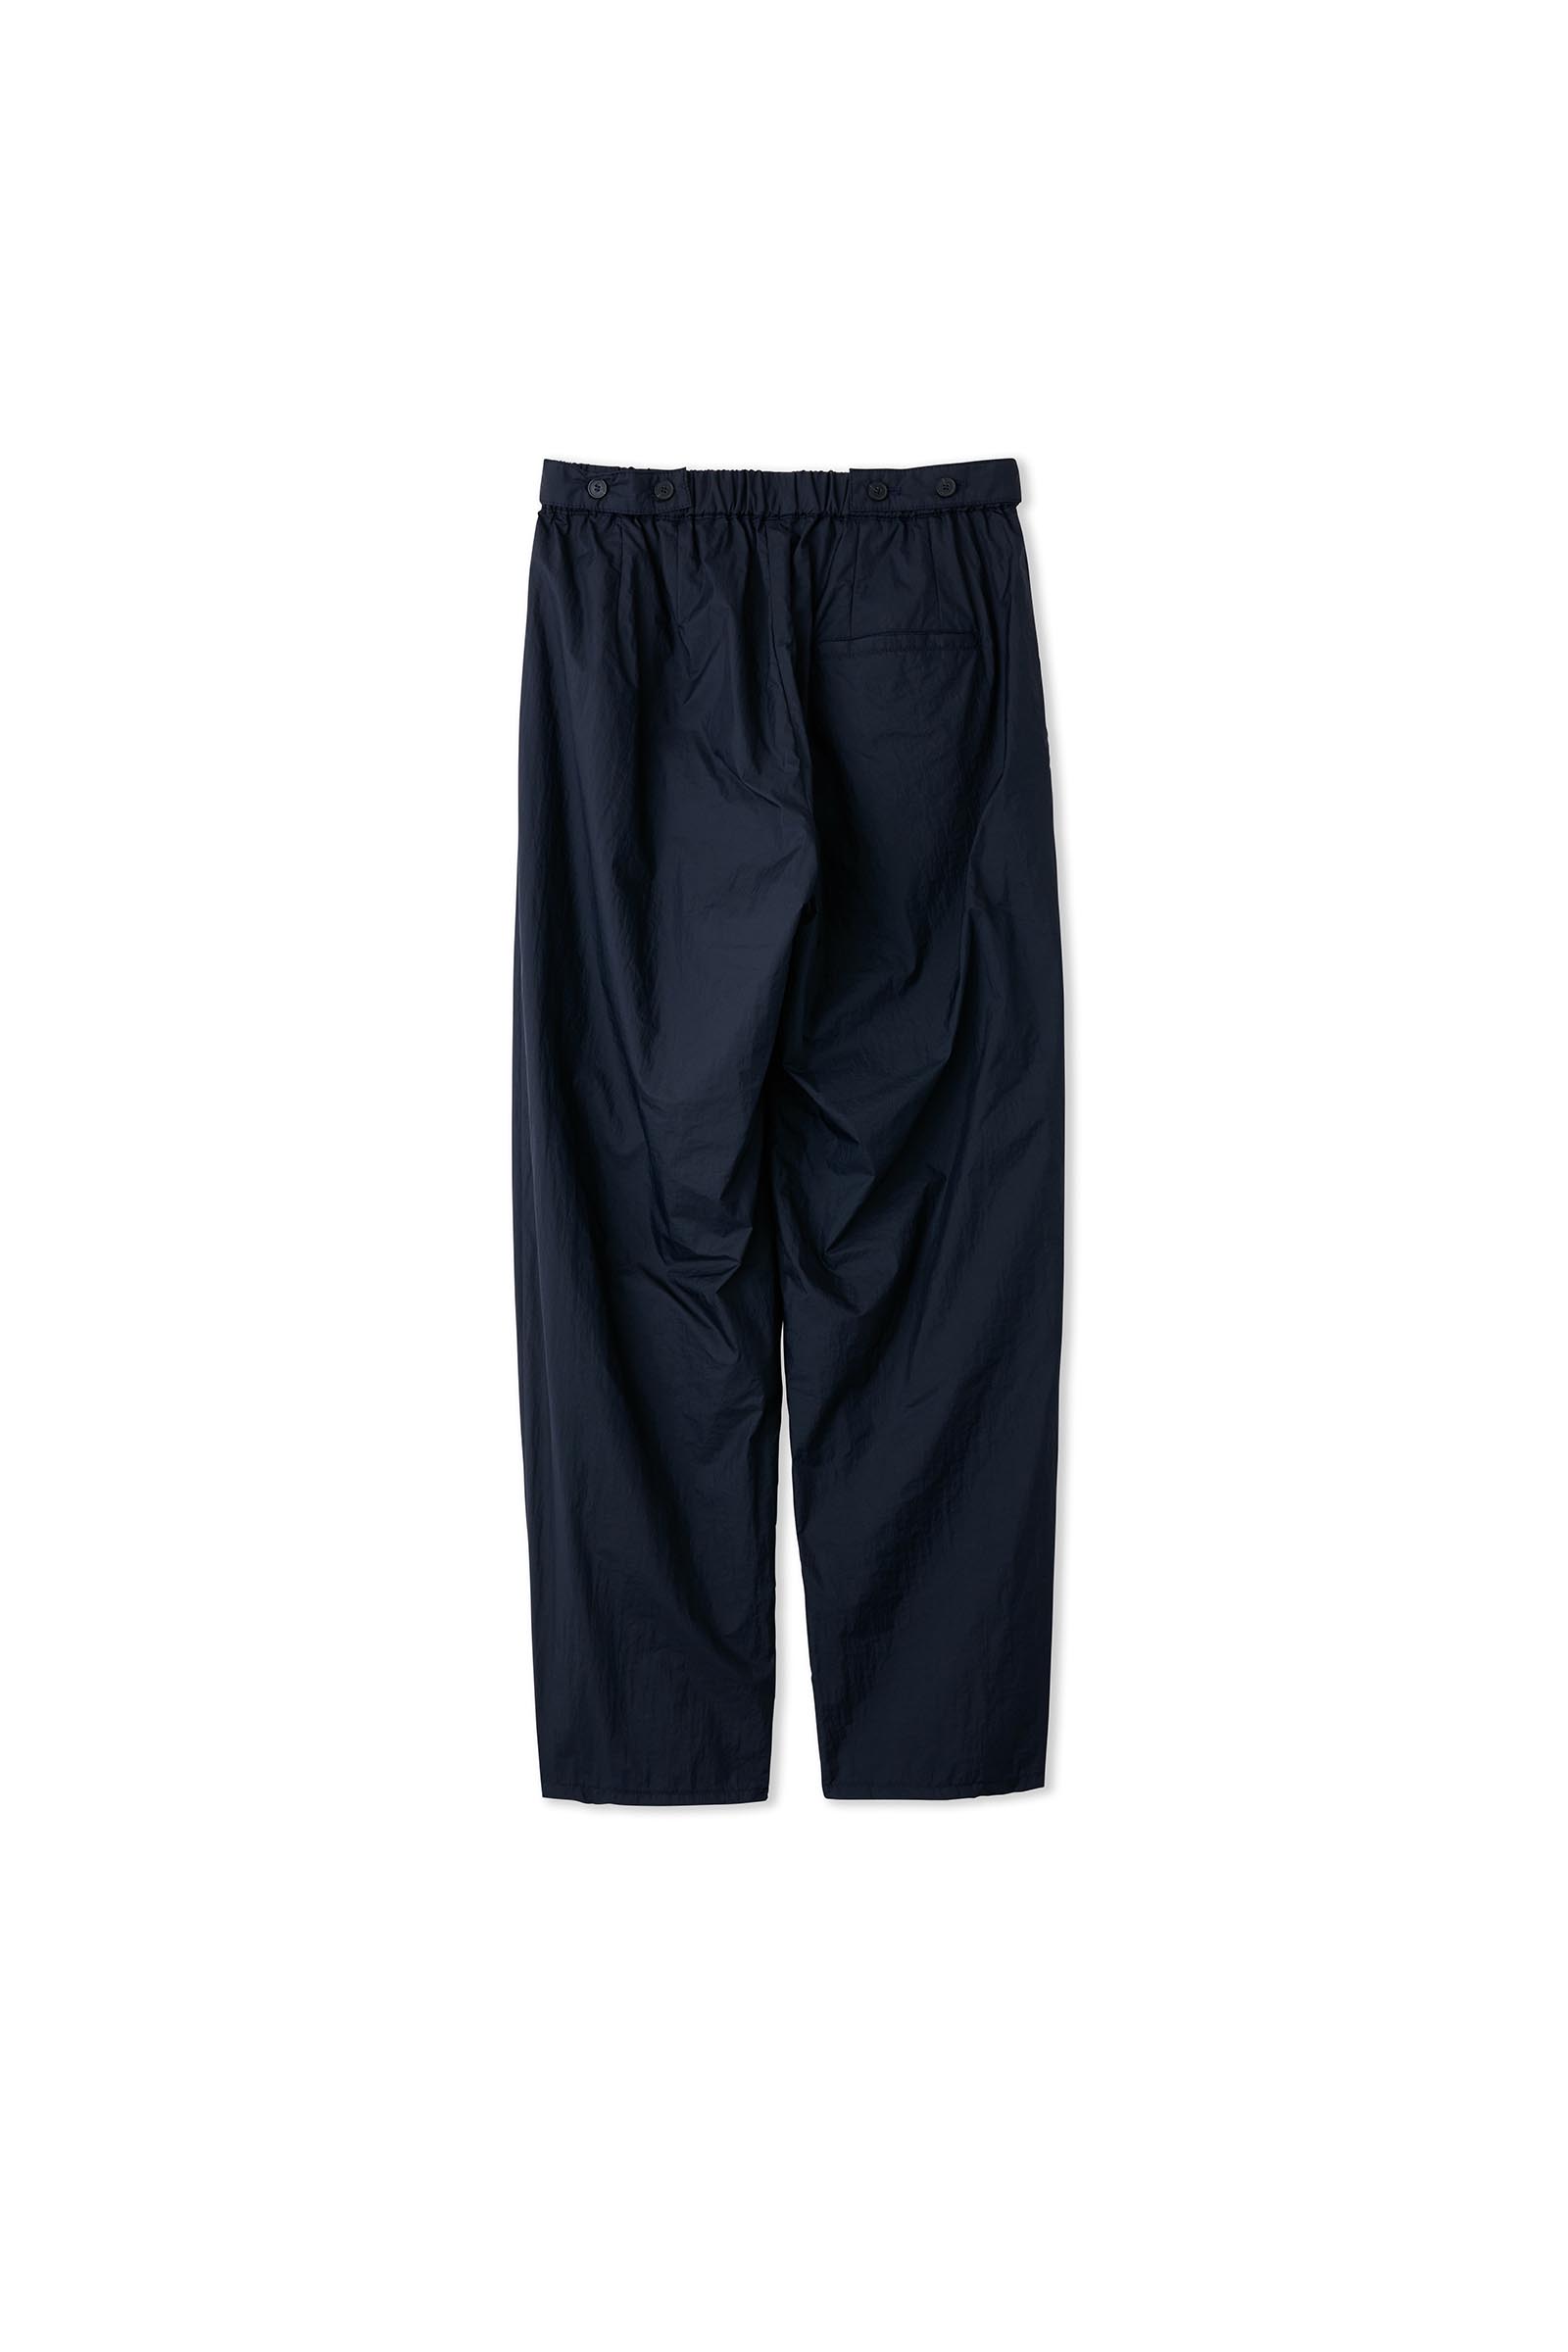 POLYPLOID / TRAVEL SUIT PANTS